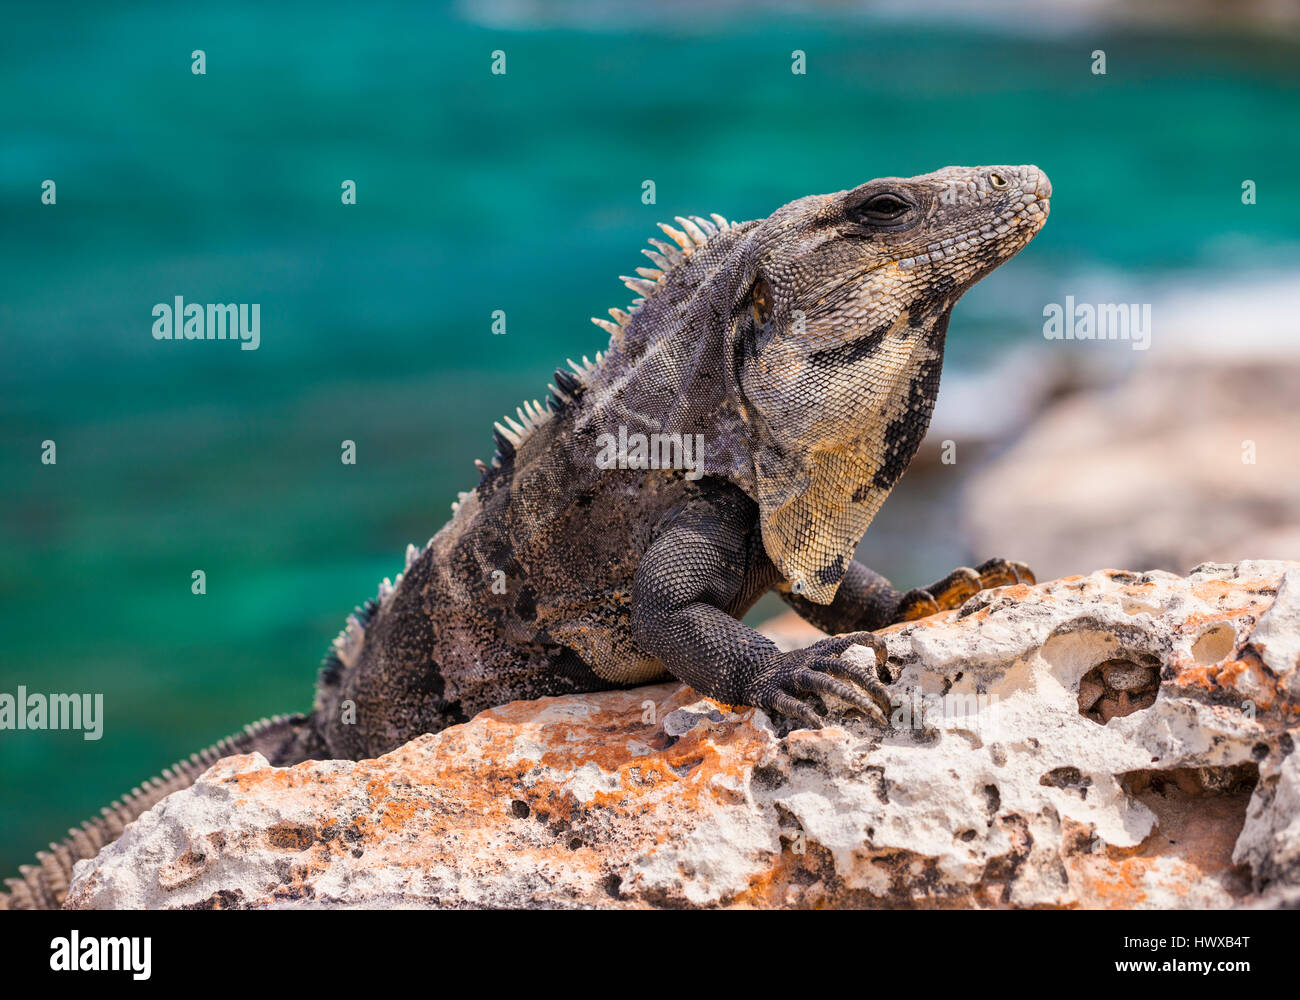 close up of Iguana lizard worming up on the rock in Mexico Stock Photo